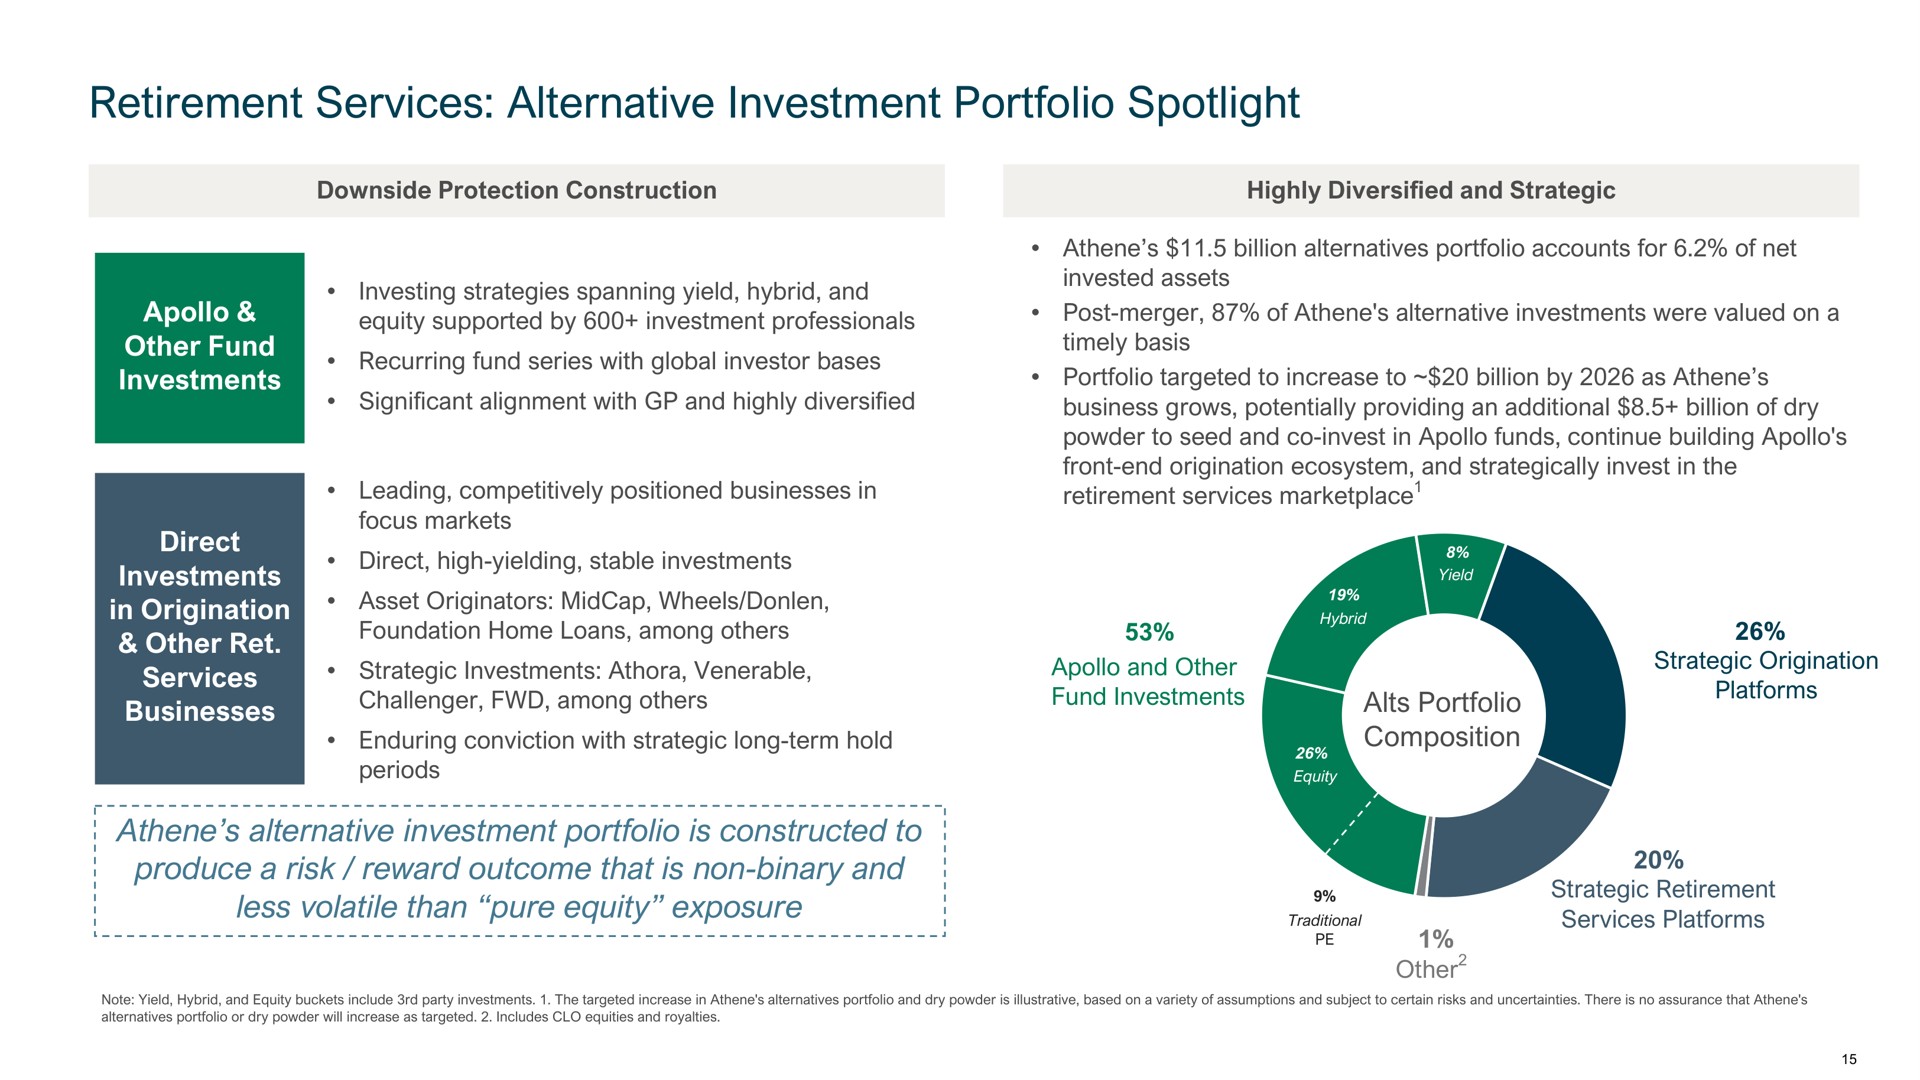 retirement services alternative investment portfolio spotlight alternative investment portfolio is constructed to produce a risk reward outcome that is non binary and less volatile than pure equity exposure supported by professionals | Apollo Global Management